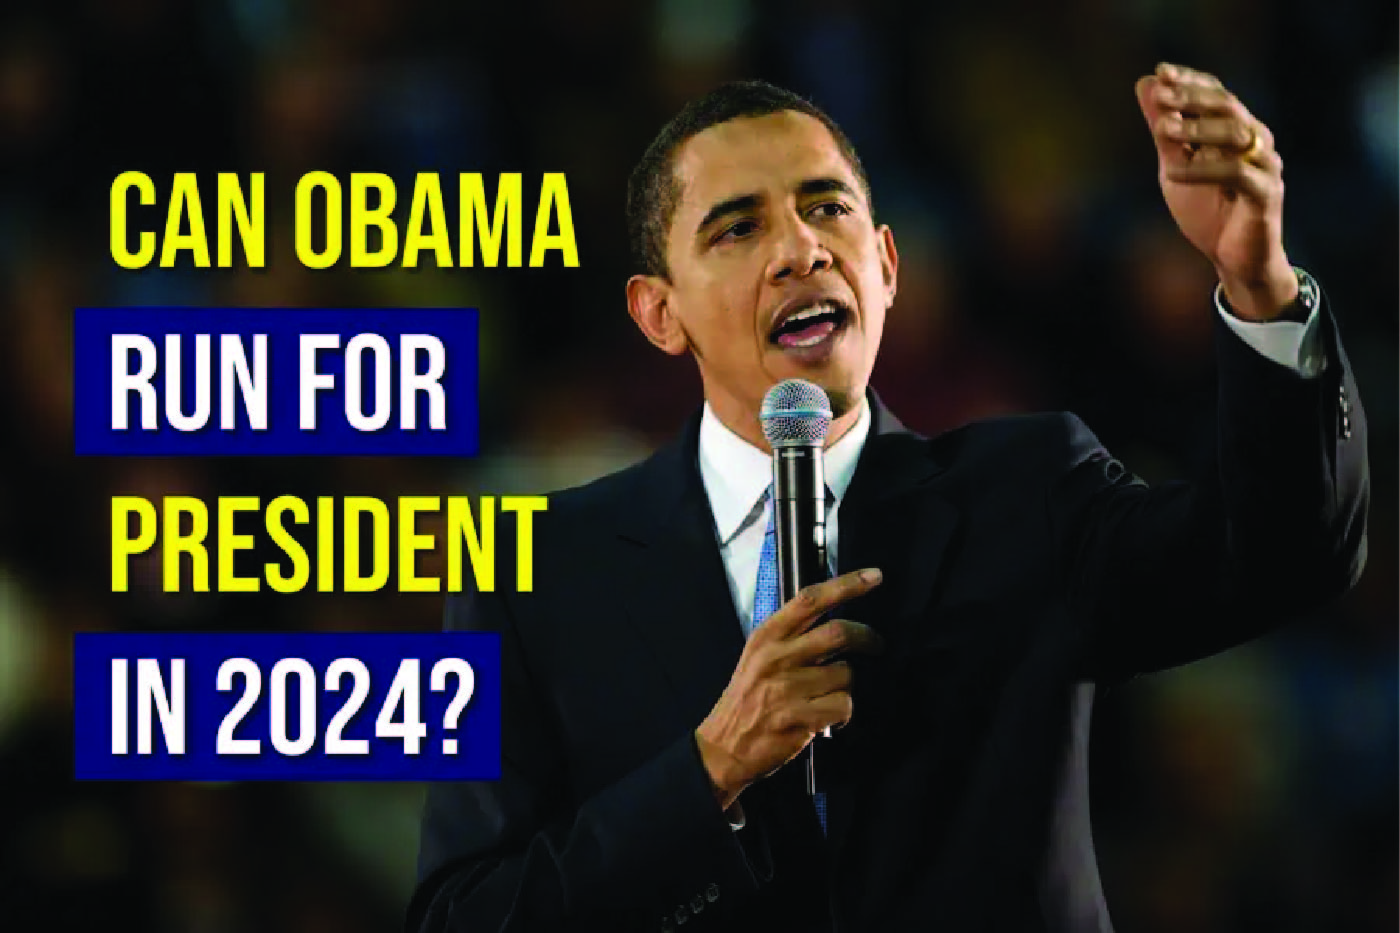 Can Obama Run For President In 2024